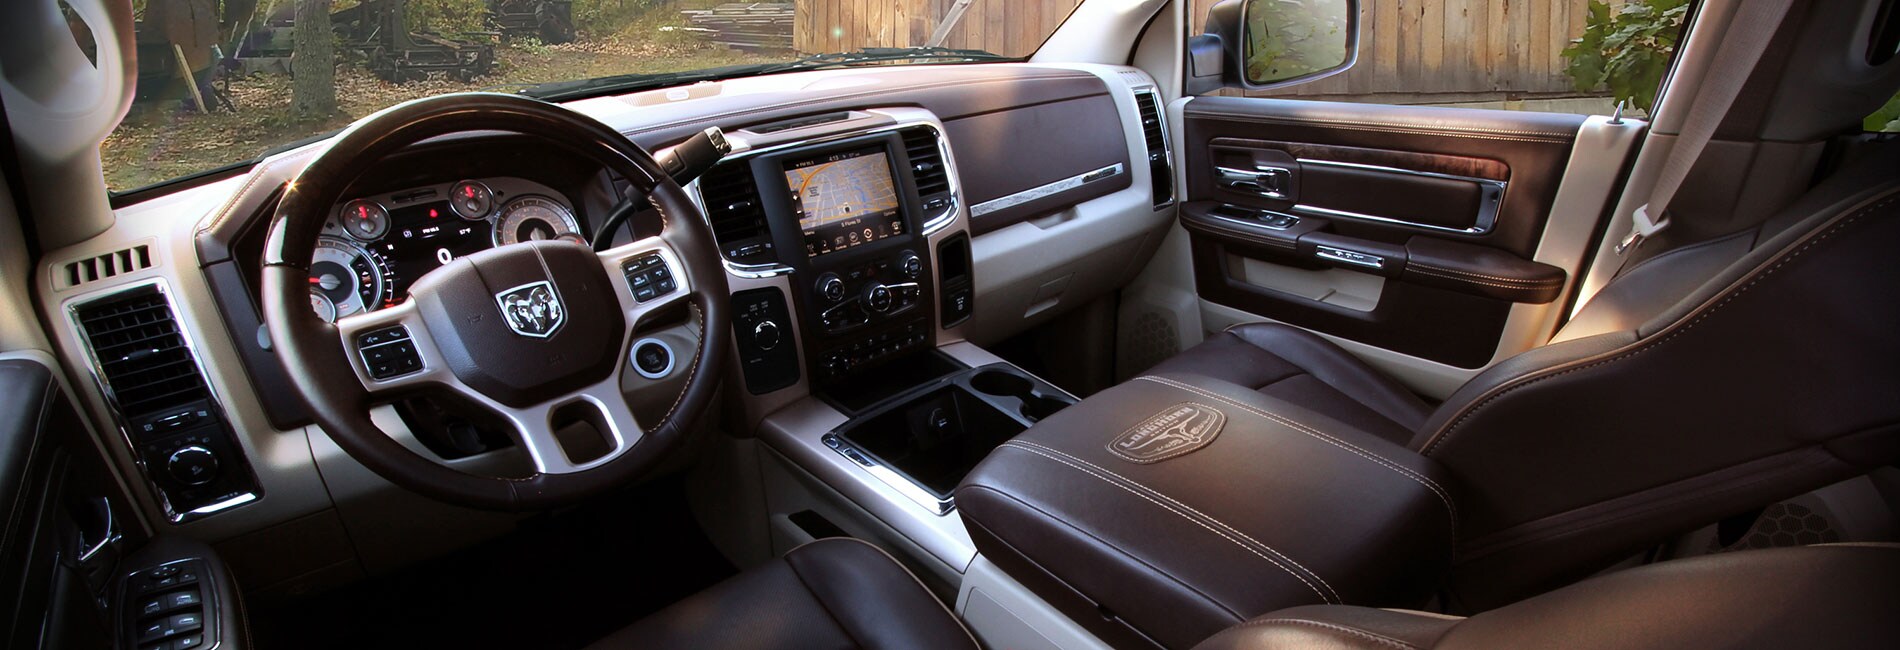 Ram 2500 Interior and Exterior Vehicle Features